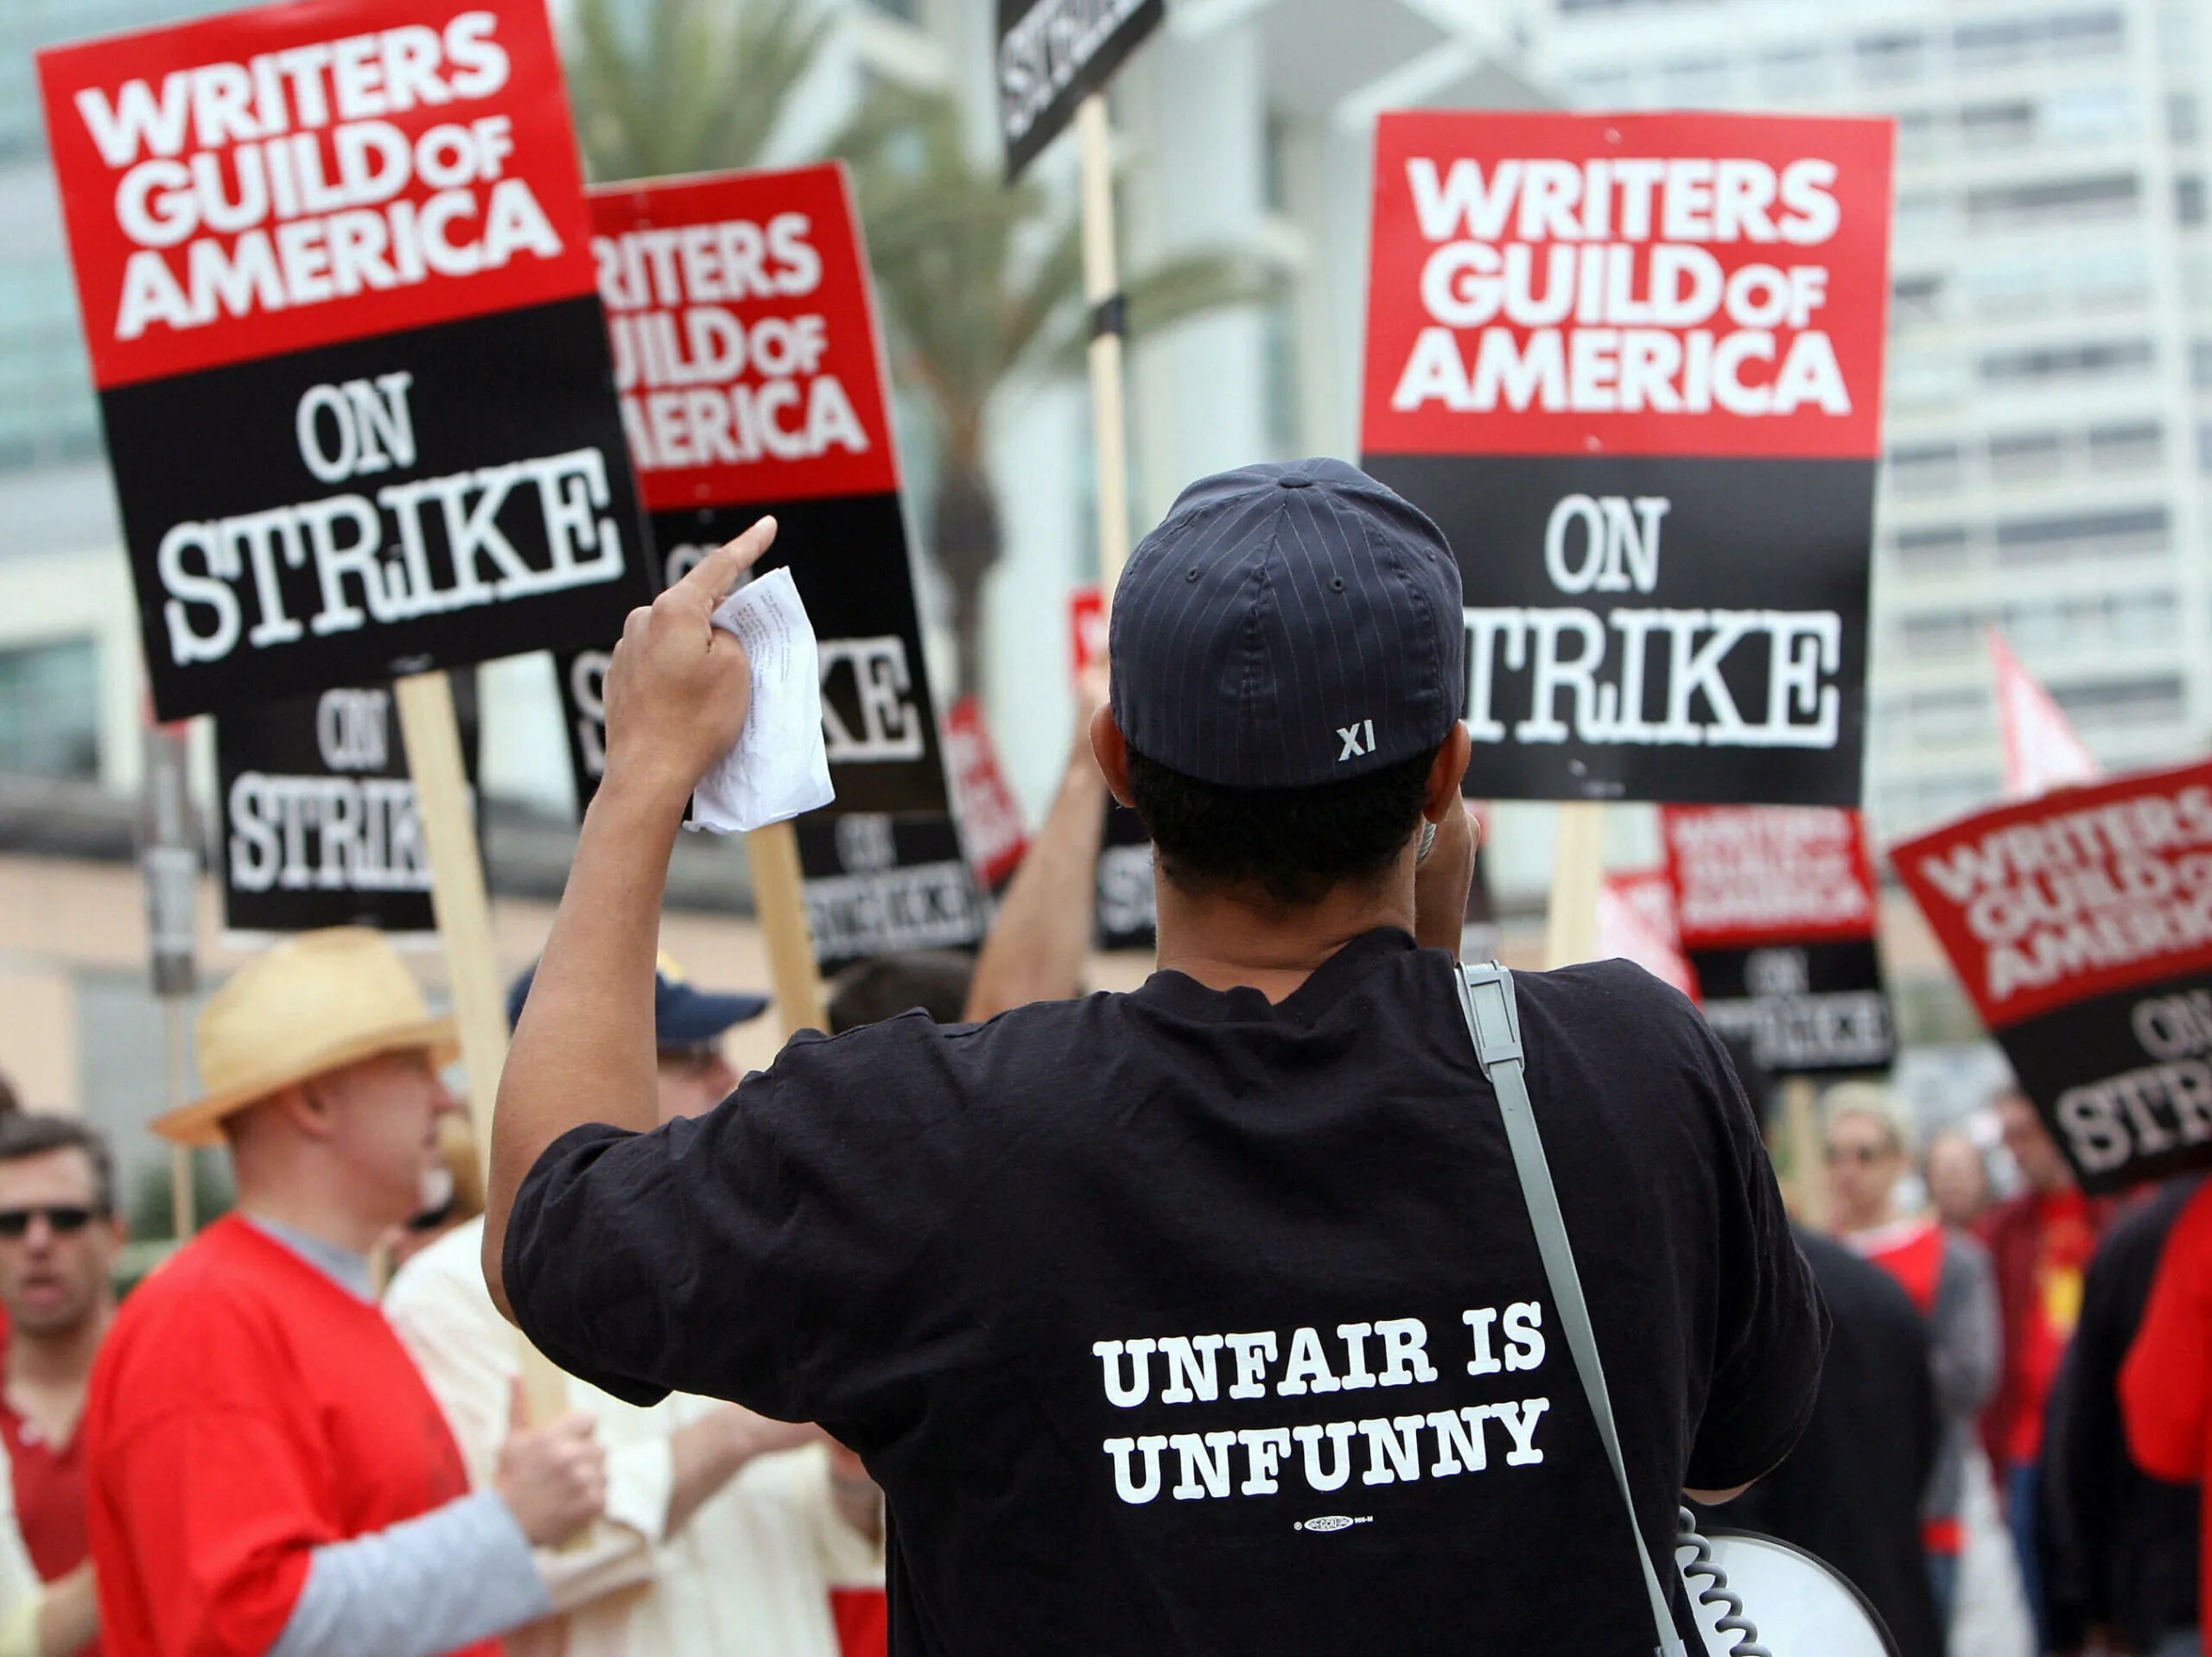 Severance work stopped due to writer strike